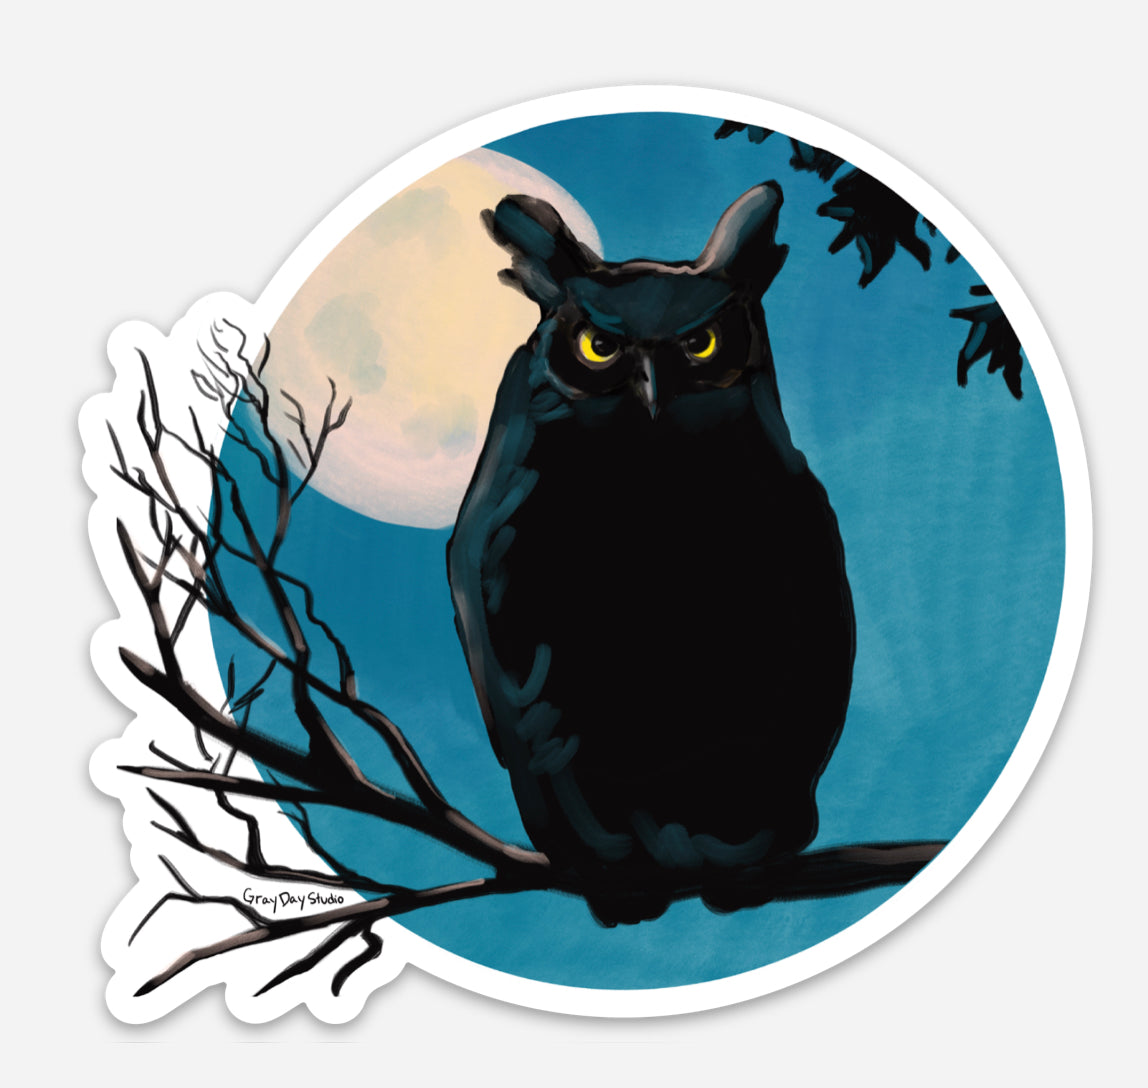 Owl Halloween sticker, spooky owl backlight against a full moon, perched on a branch. Painted by Maine artist Abigail Gray Swartz